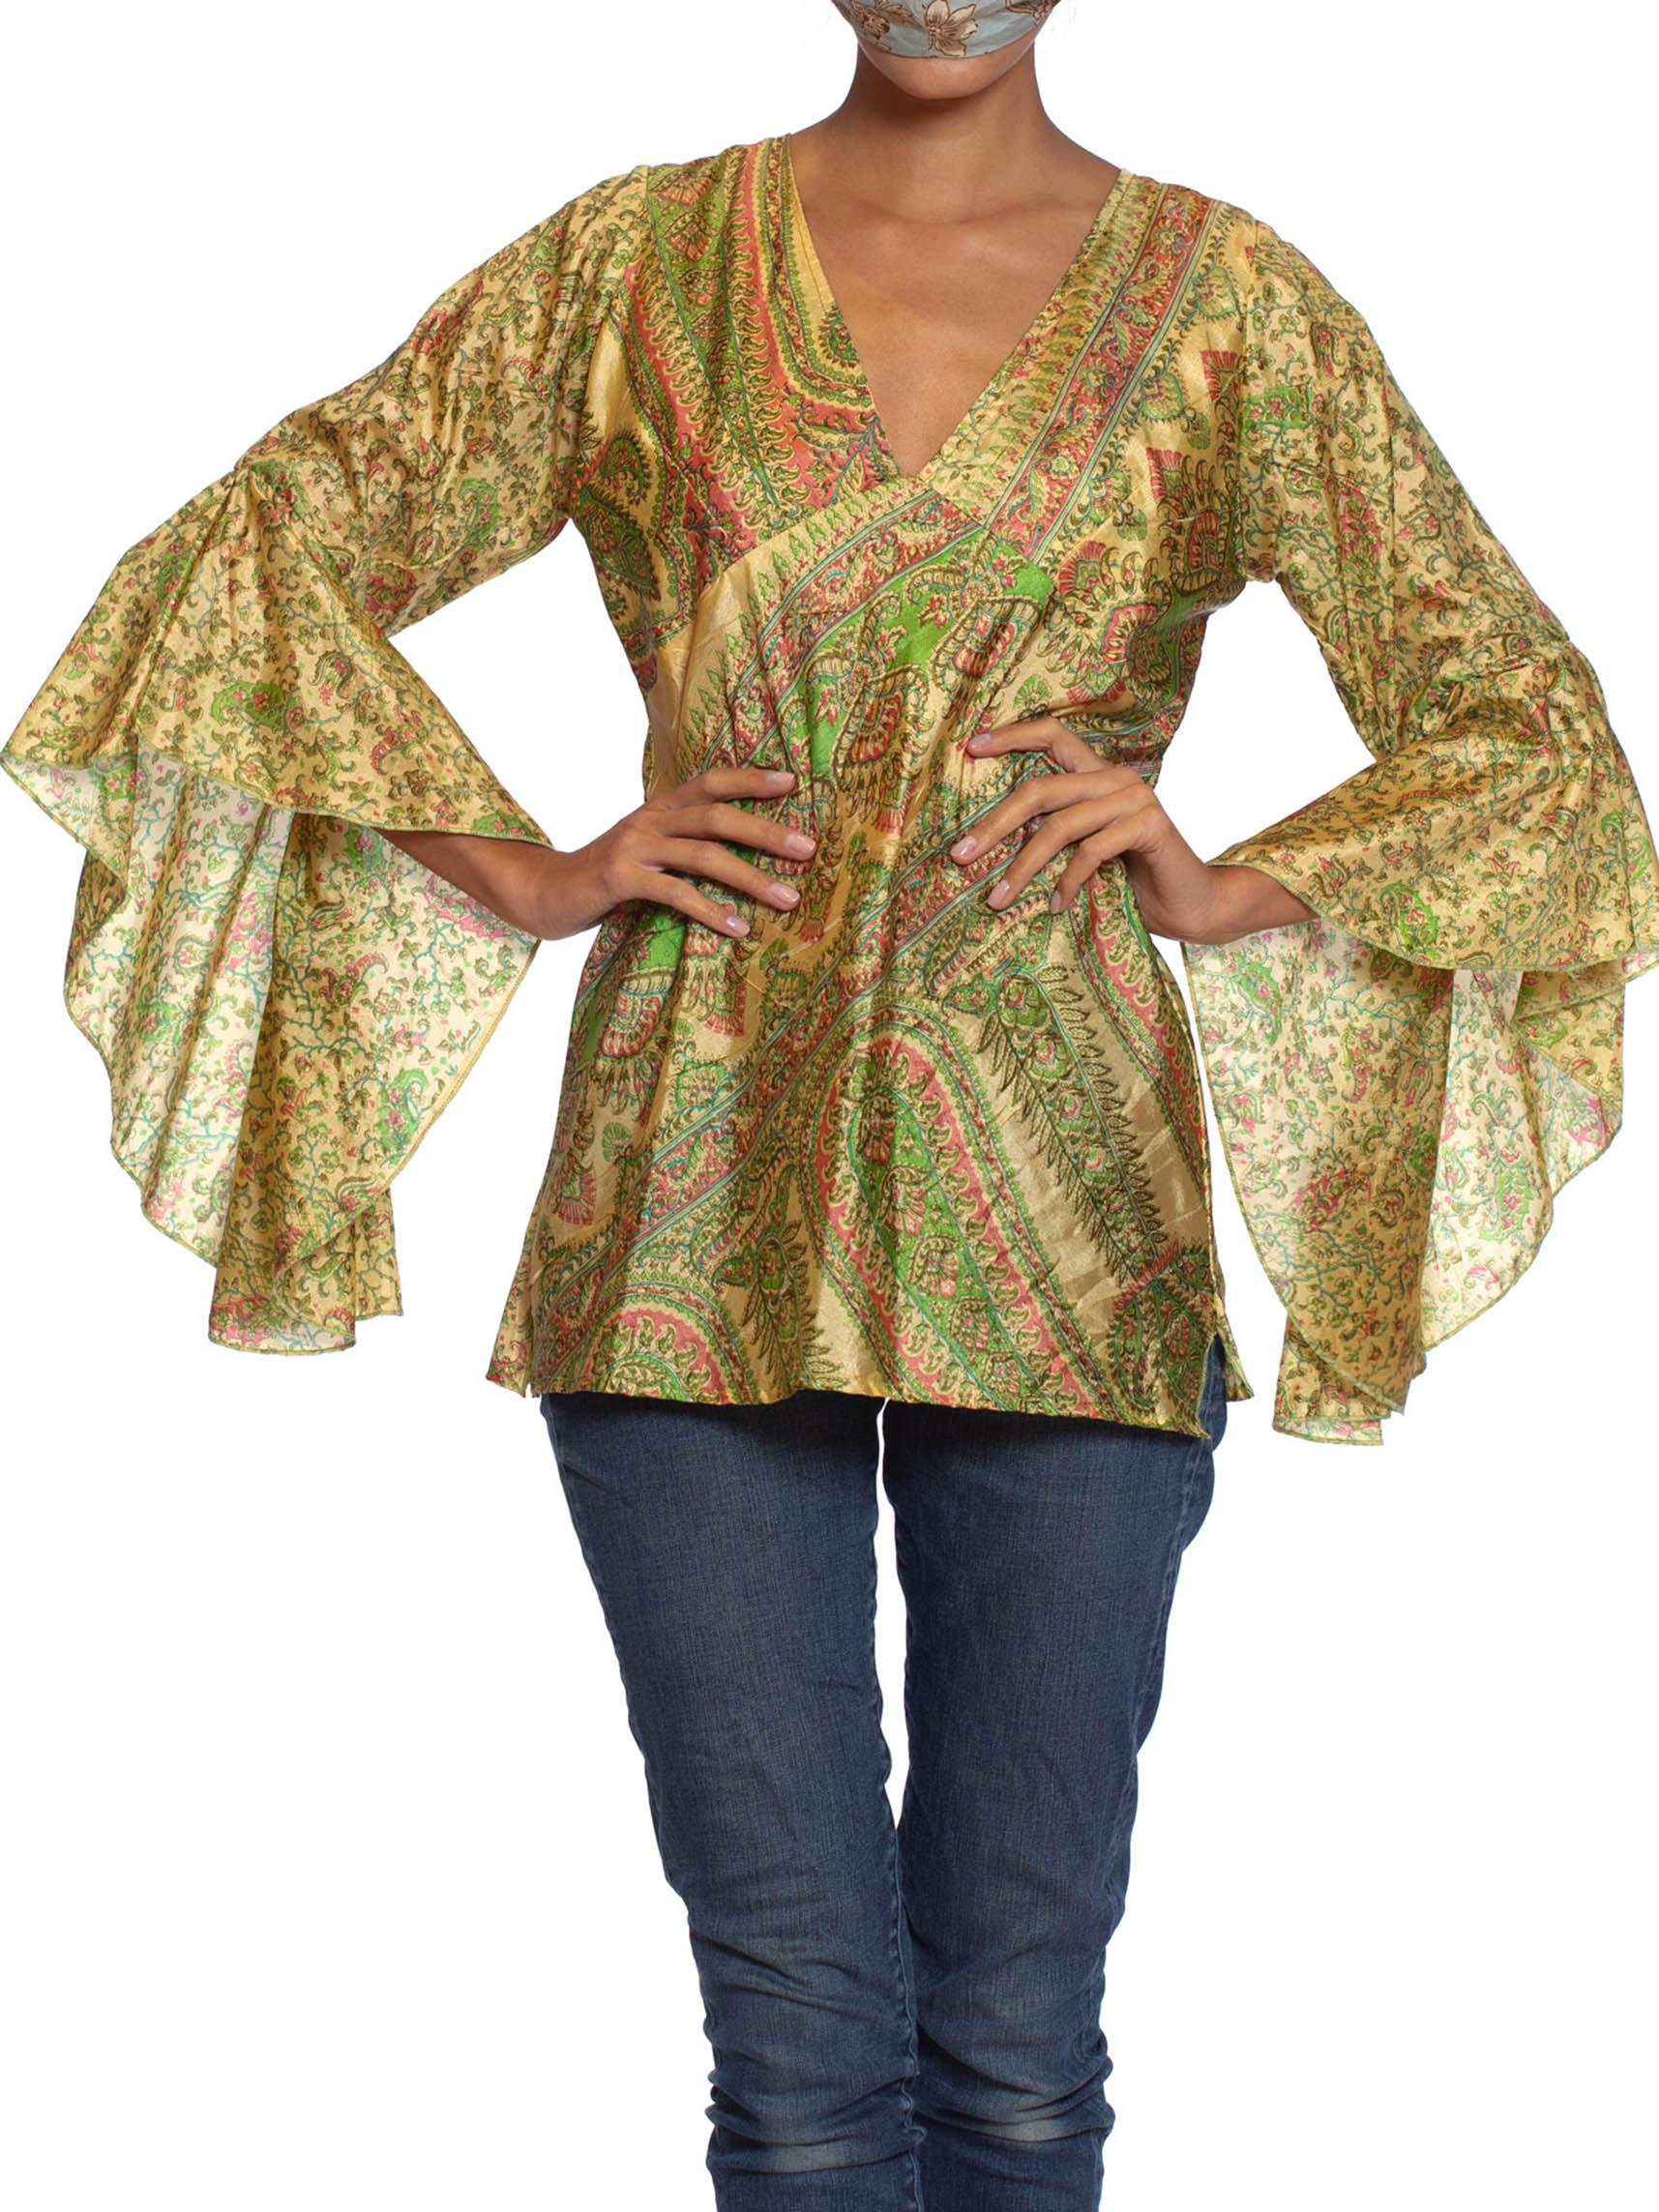 Women's 1970S Pink & Green Silk Hand Printed Indian Paisley Blouse